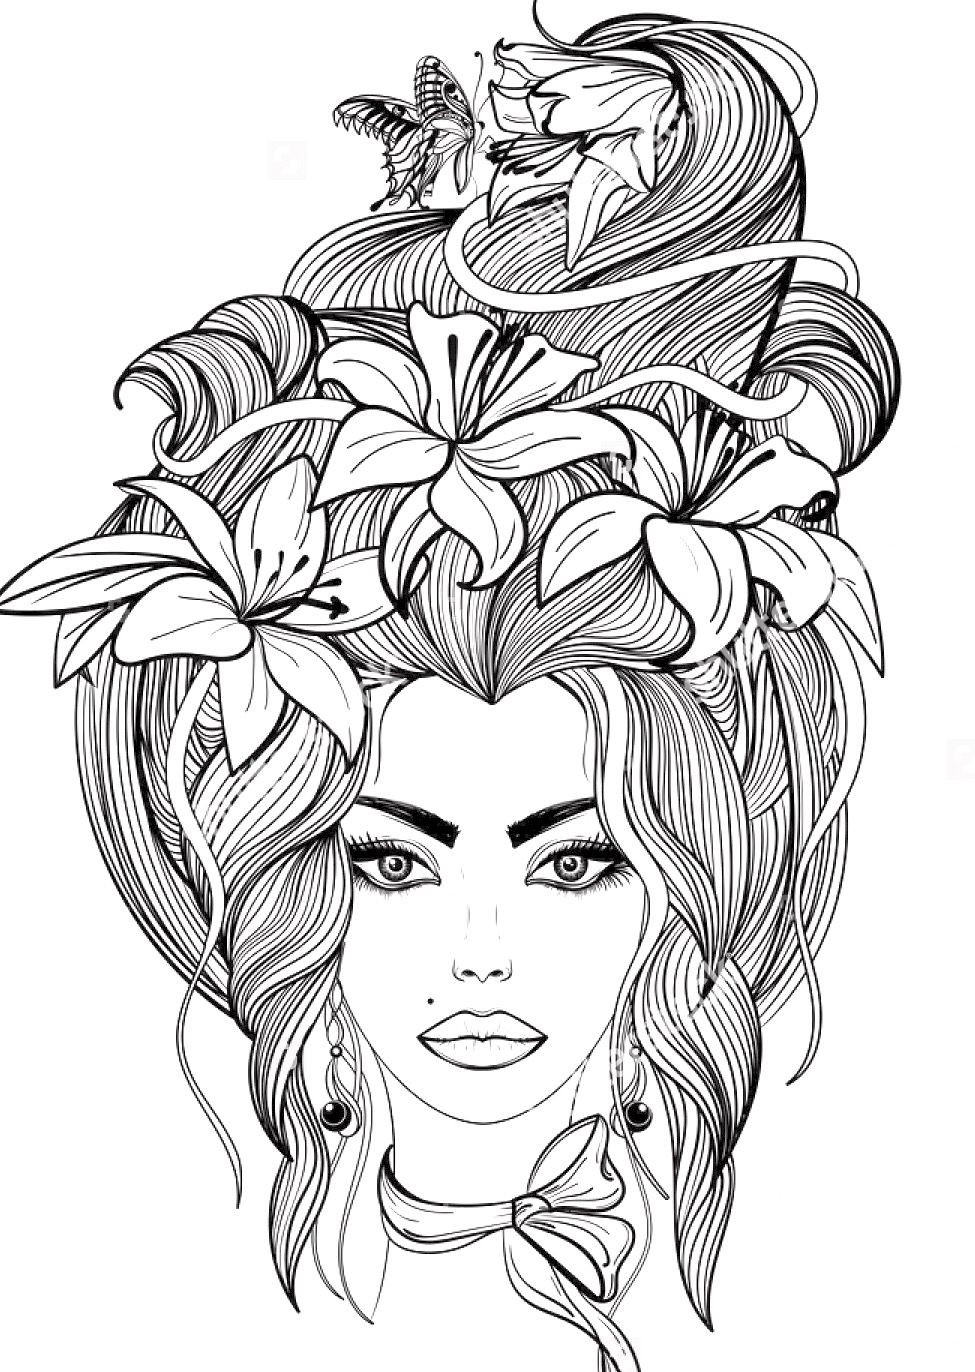 Coloring Pages Of Girls For Adults
 Portrait of a girl with lily flowers and butterfly in her